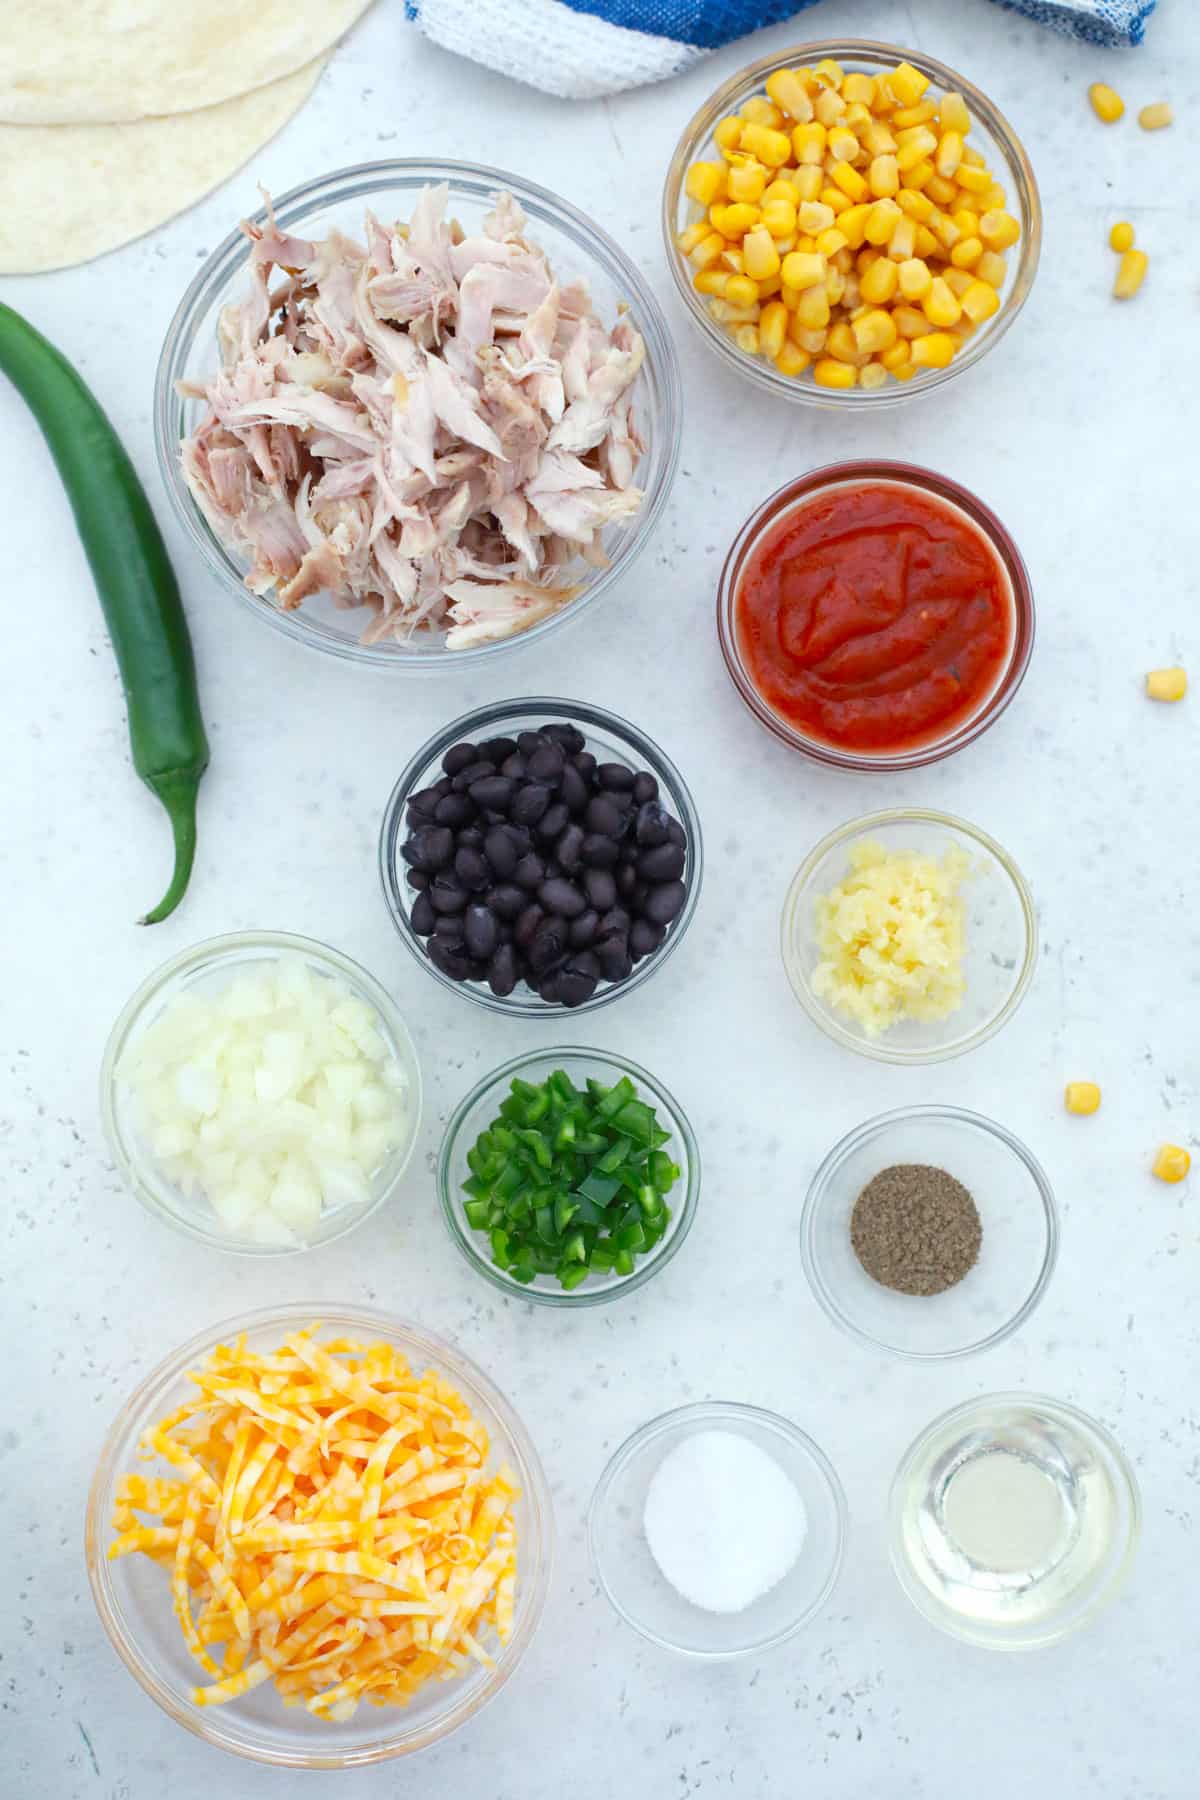 ingredients for making air fryer chicken taquitos on a tables with chicken, cheese, black. beans, peppers and more.